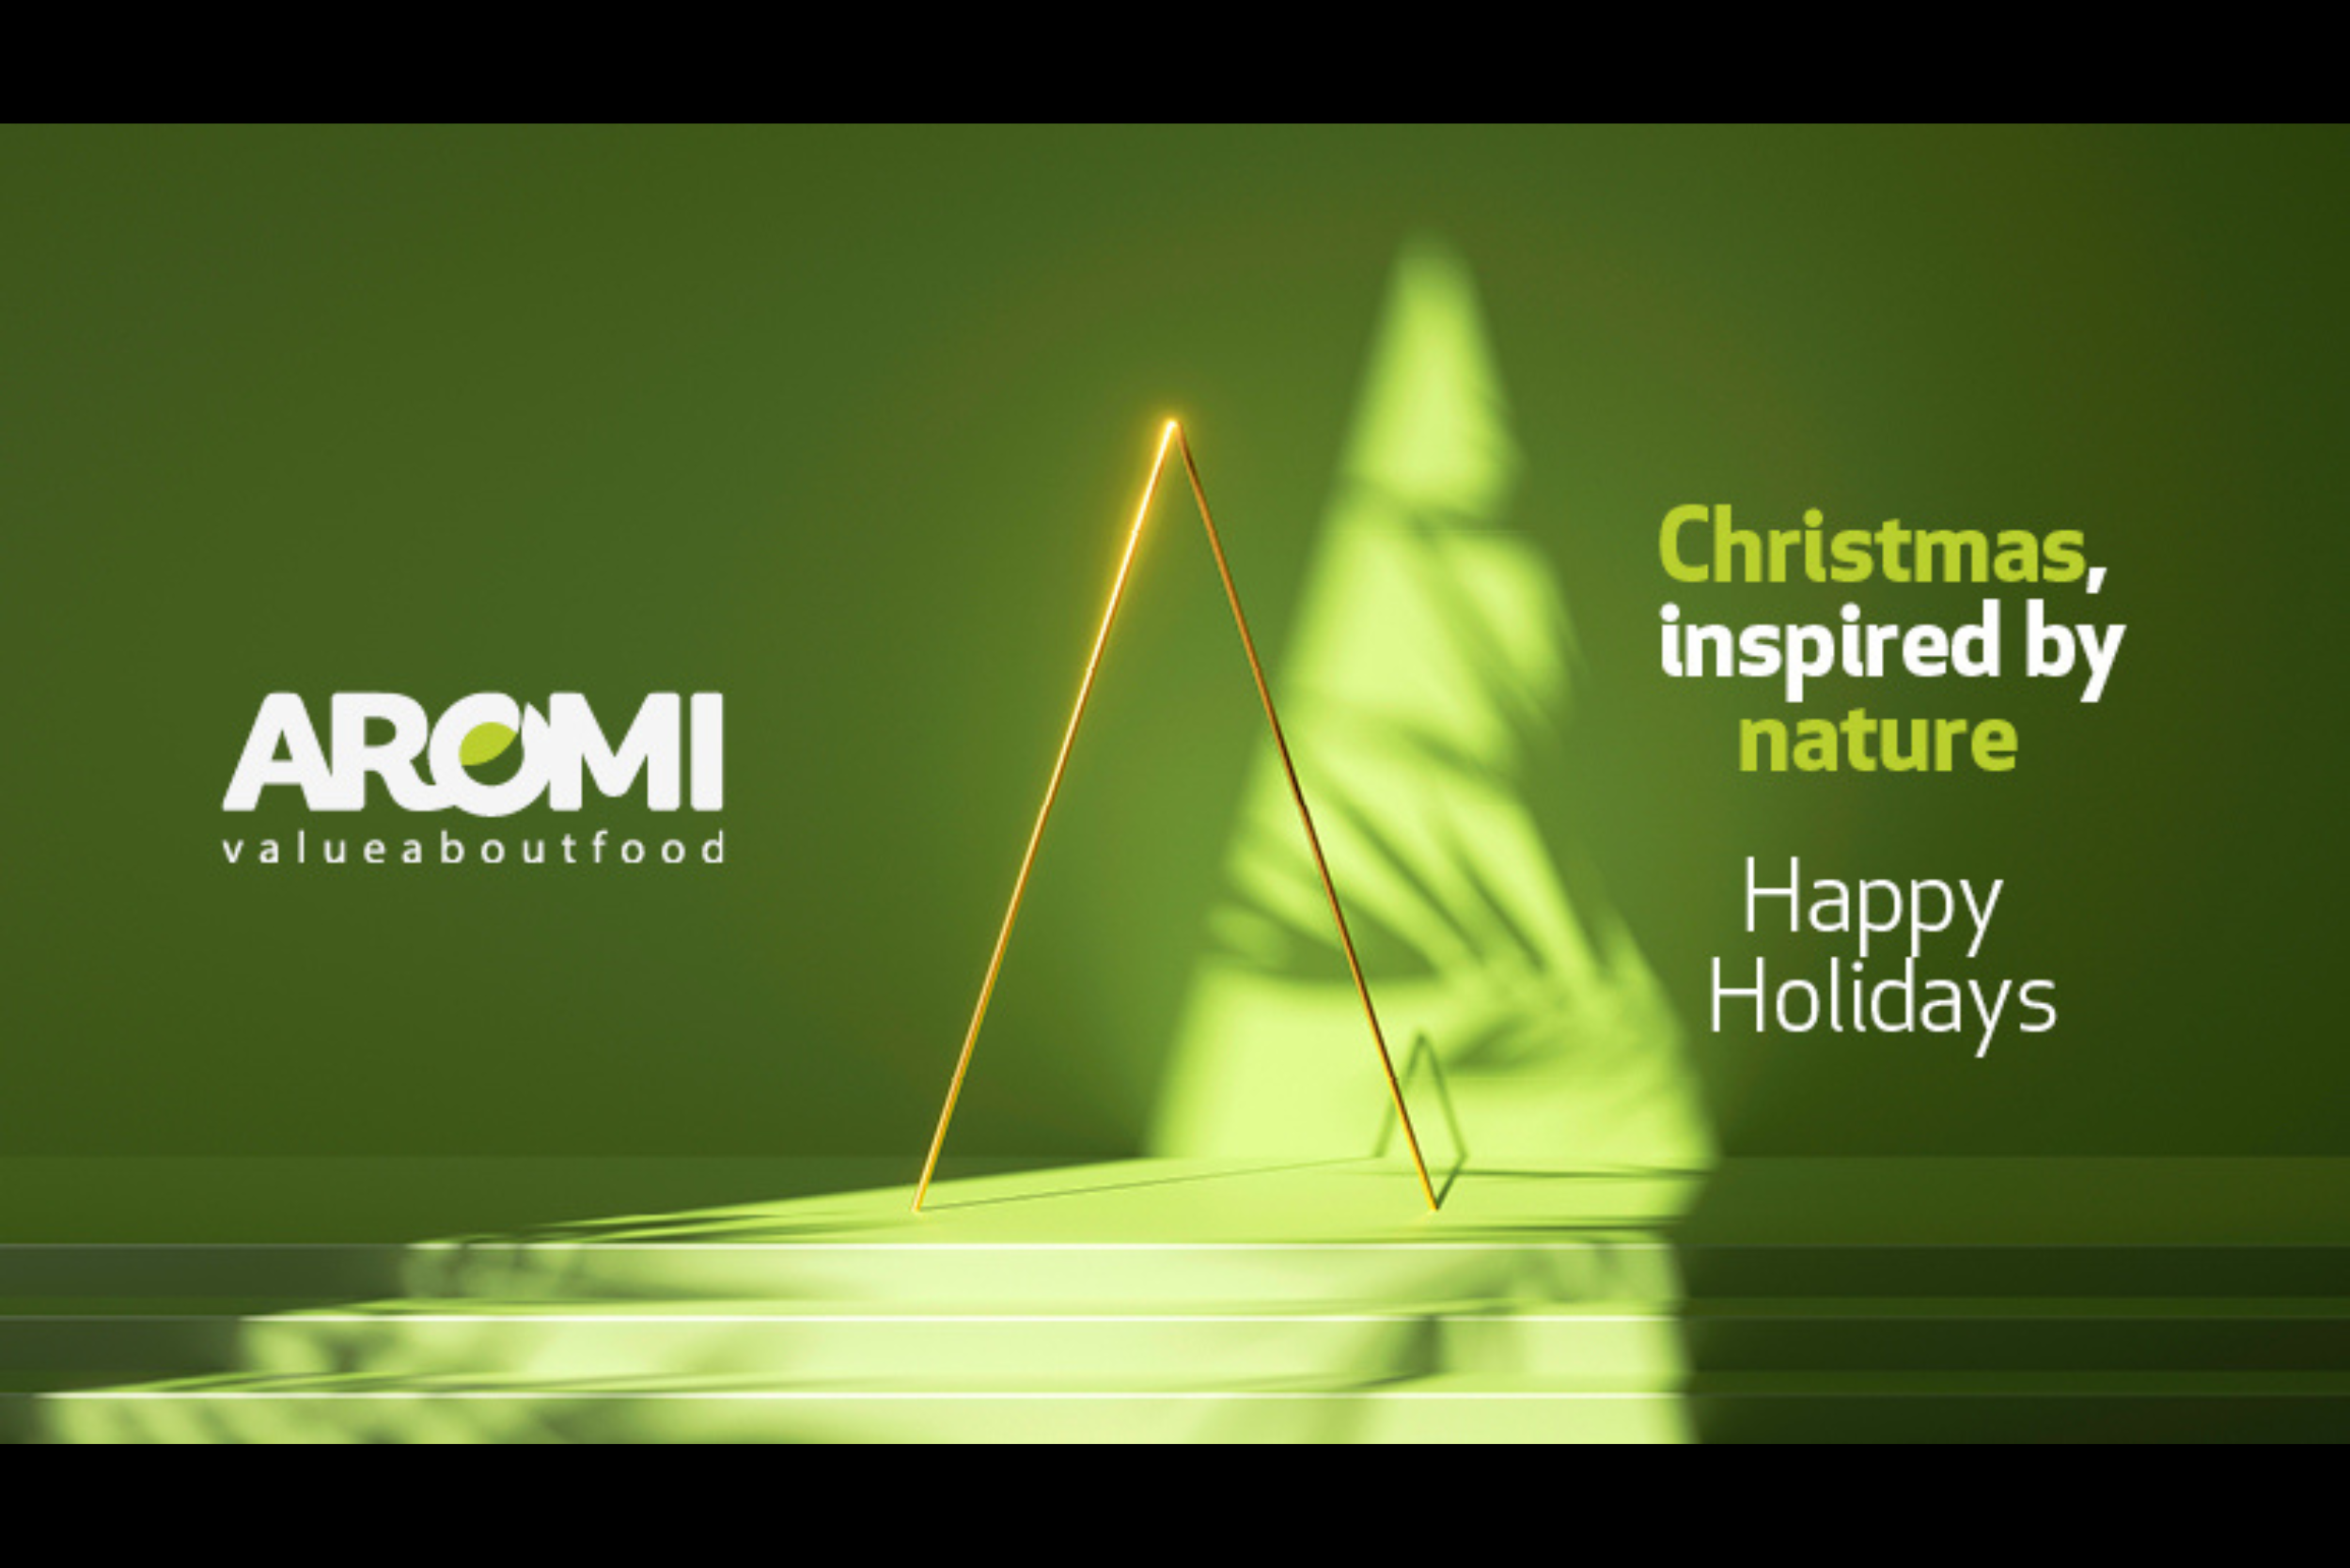 AROMI’s Christmas, inspired by Nature